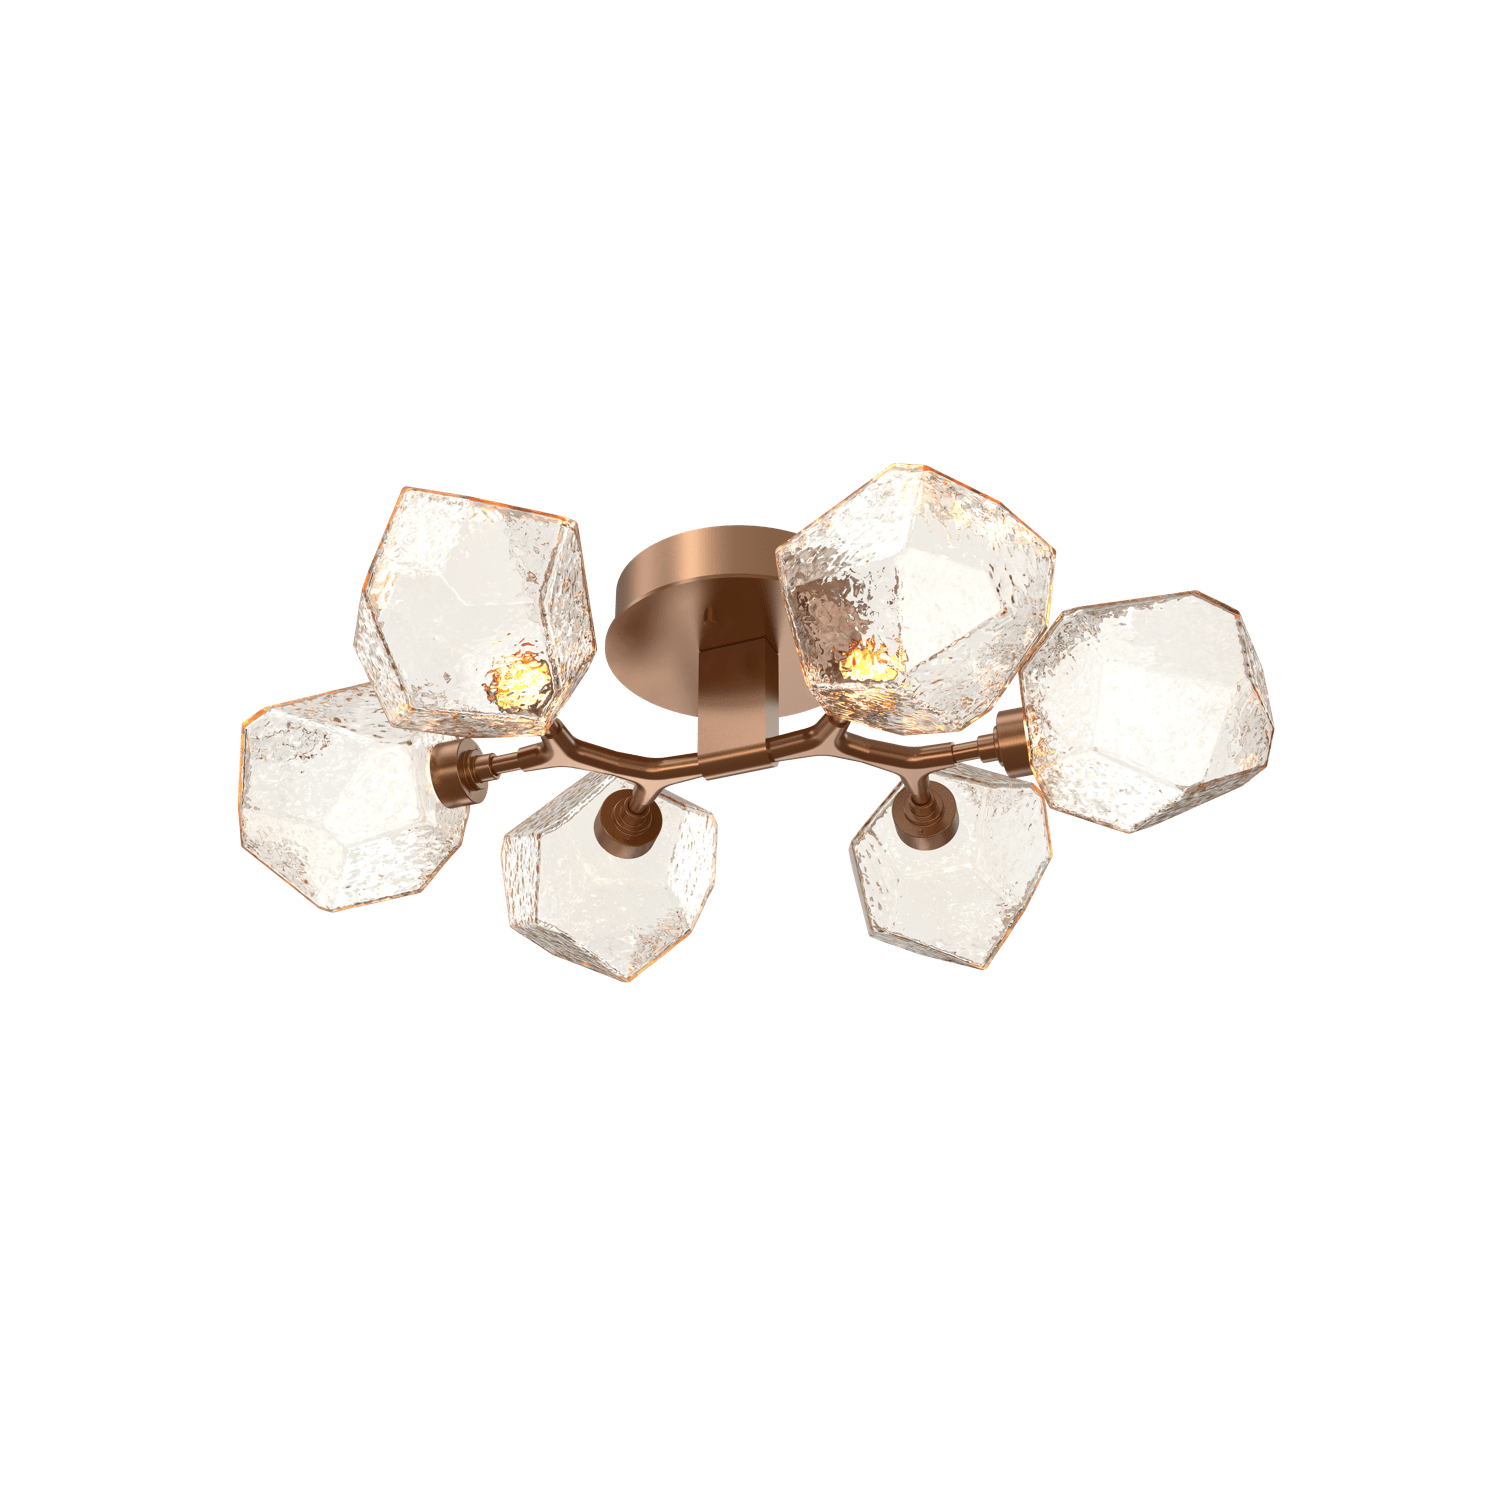 CLB0039-01-NB-A-Hammerton-Studio-Gem-6-light-organic-flush-mount-light-with-novel-brass-finish-and-amber-blown-glass-shades-and-LED-lamping